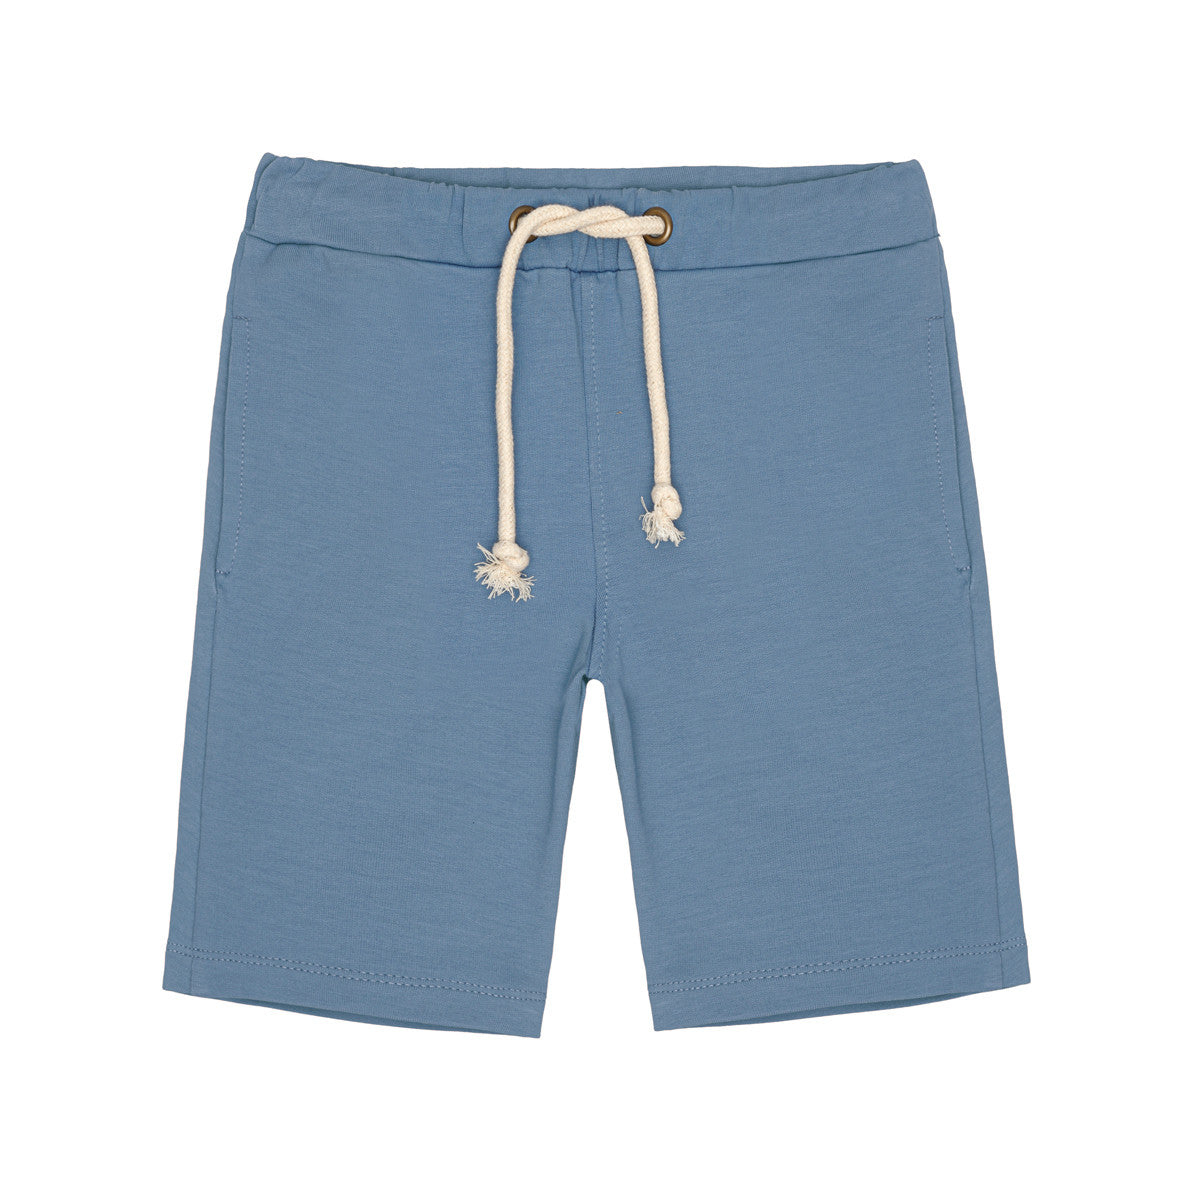 Little Hedonist super comfy organic surfer shorts in Blue Shadow made from our softest organic cotton. Sustainable kids clothing for boys and girls.